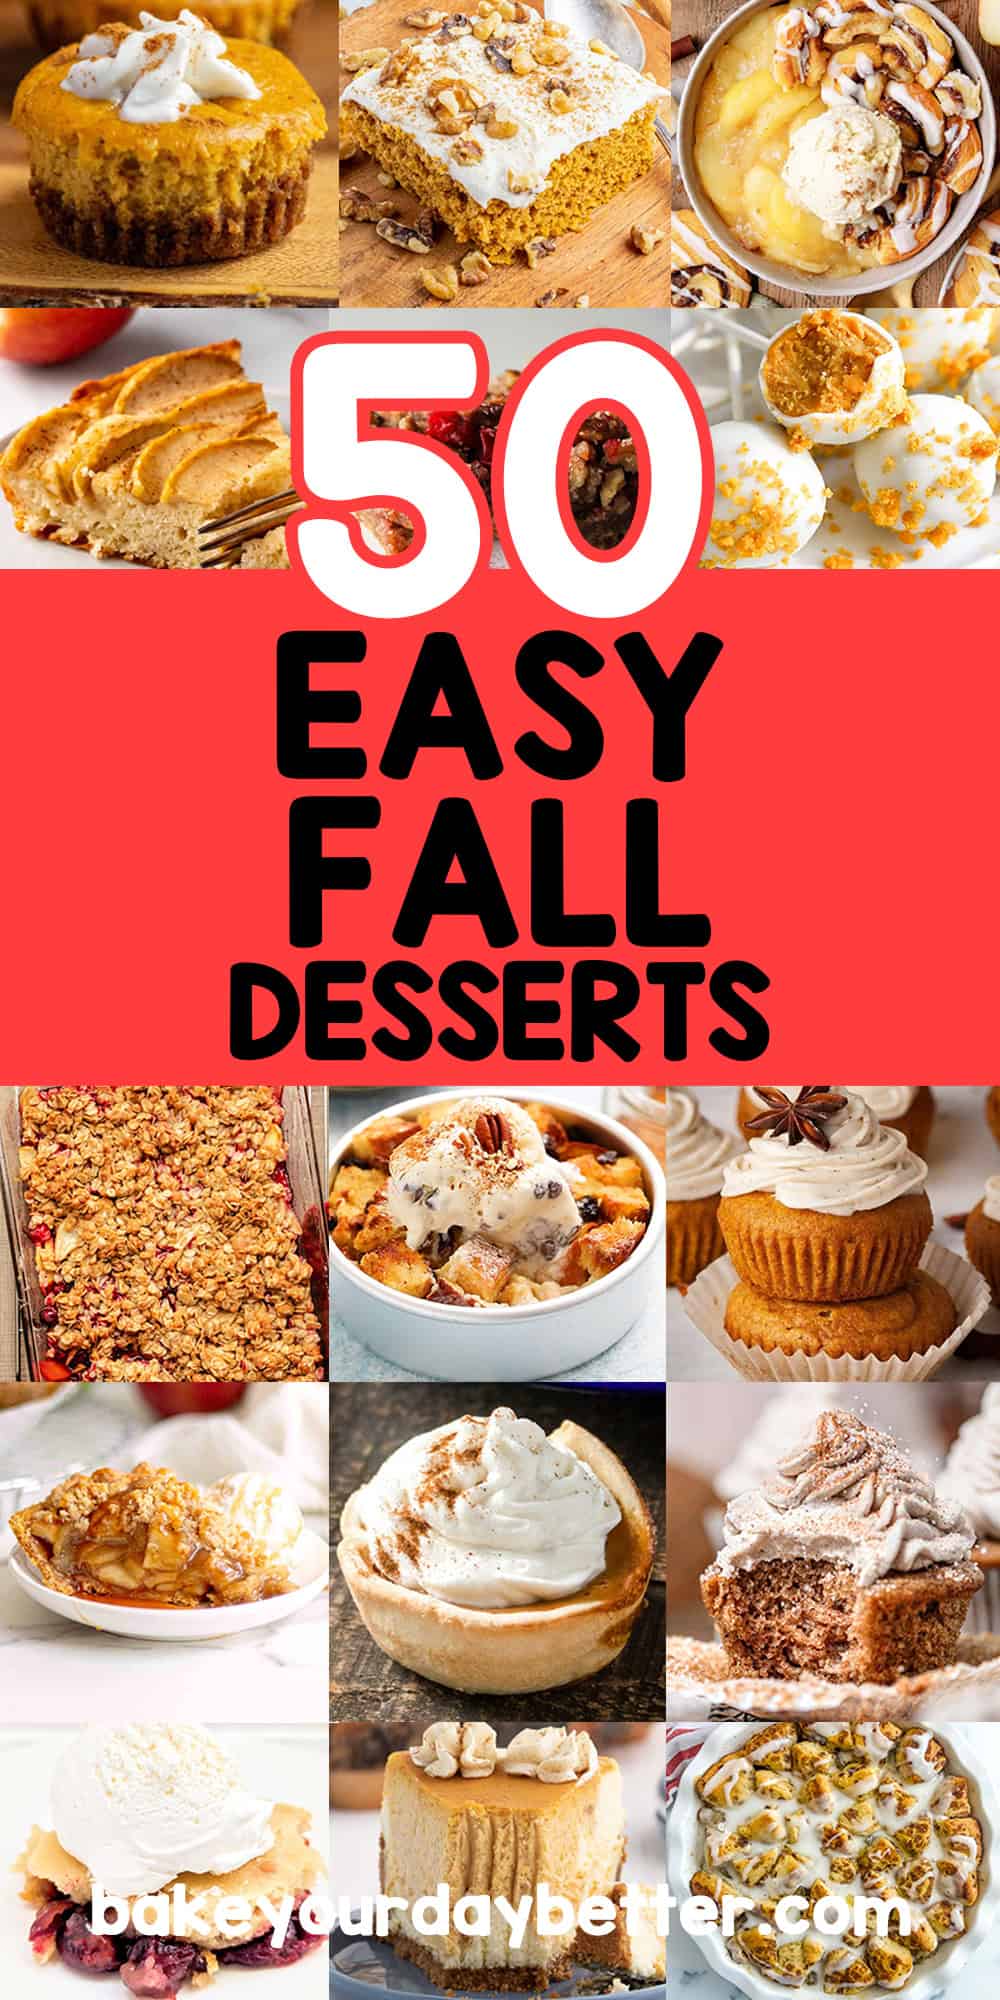 pictures of different fall desserts with text overlay that says: 50 easy fall desserts